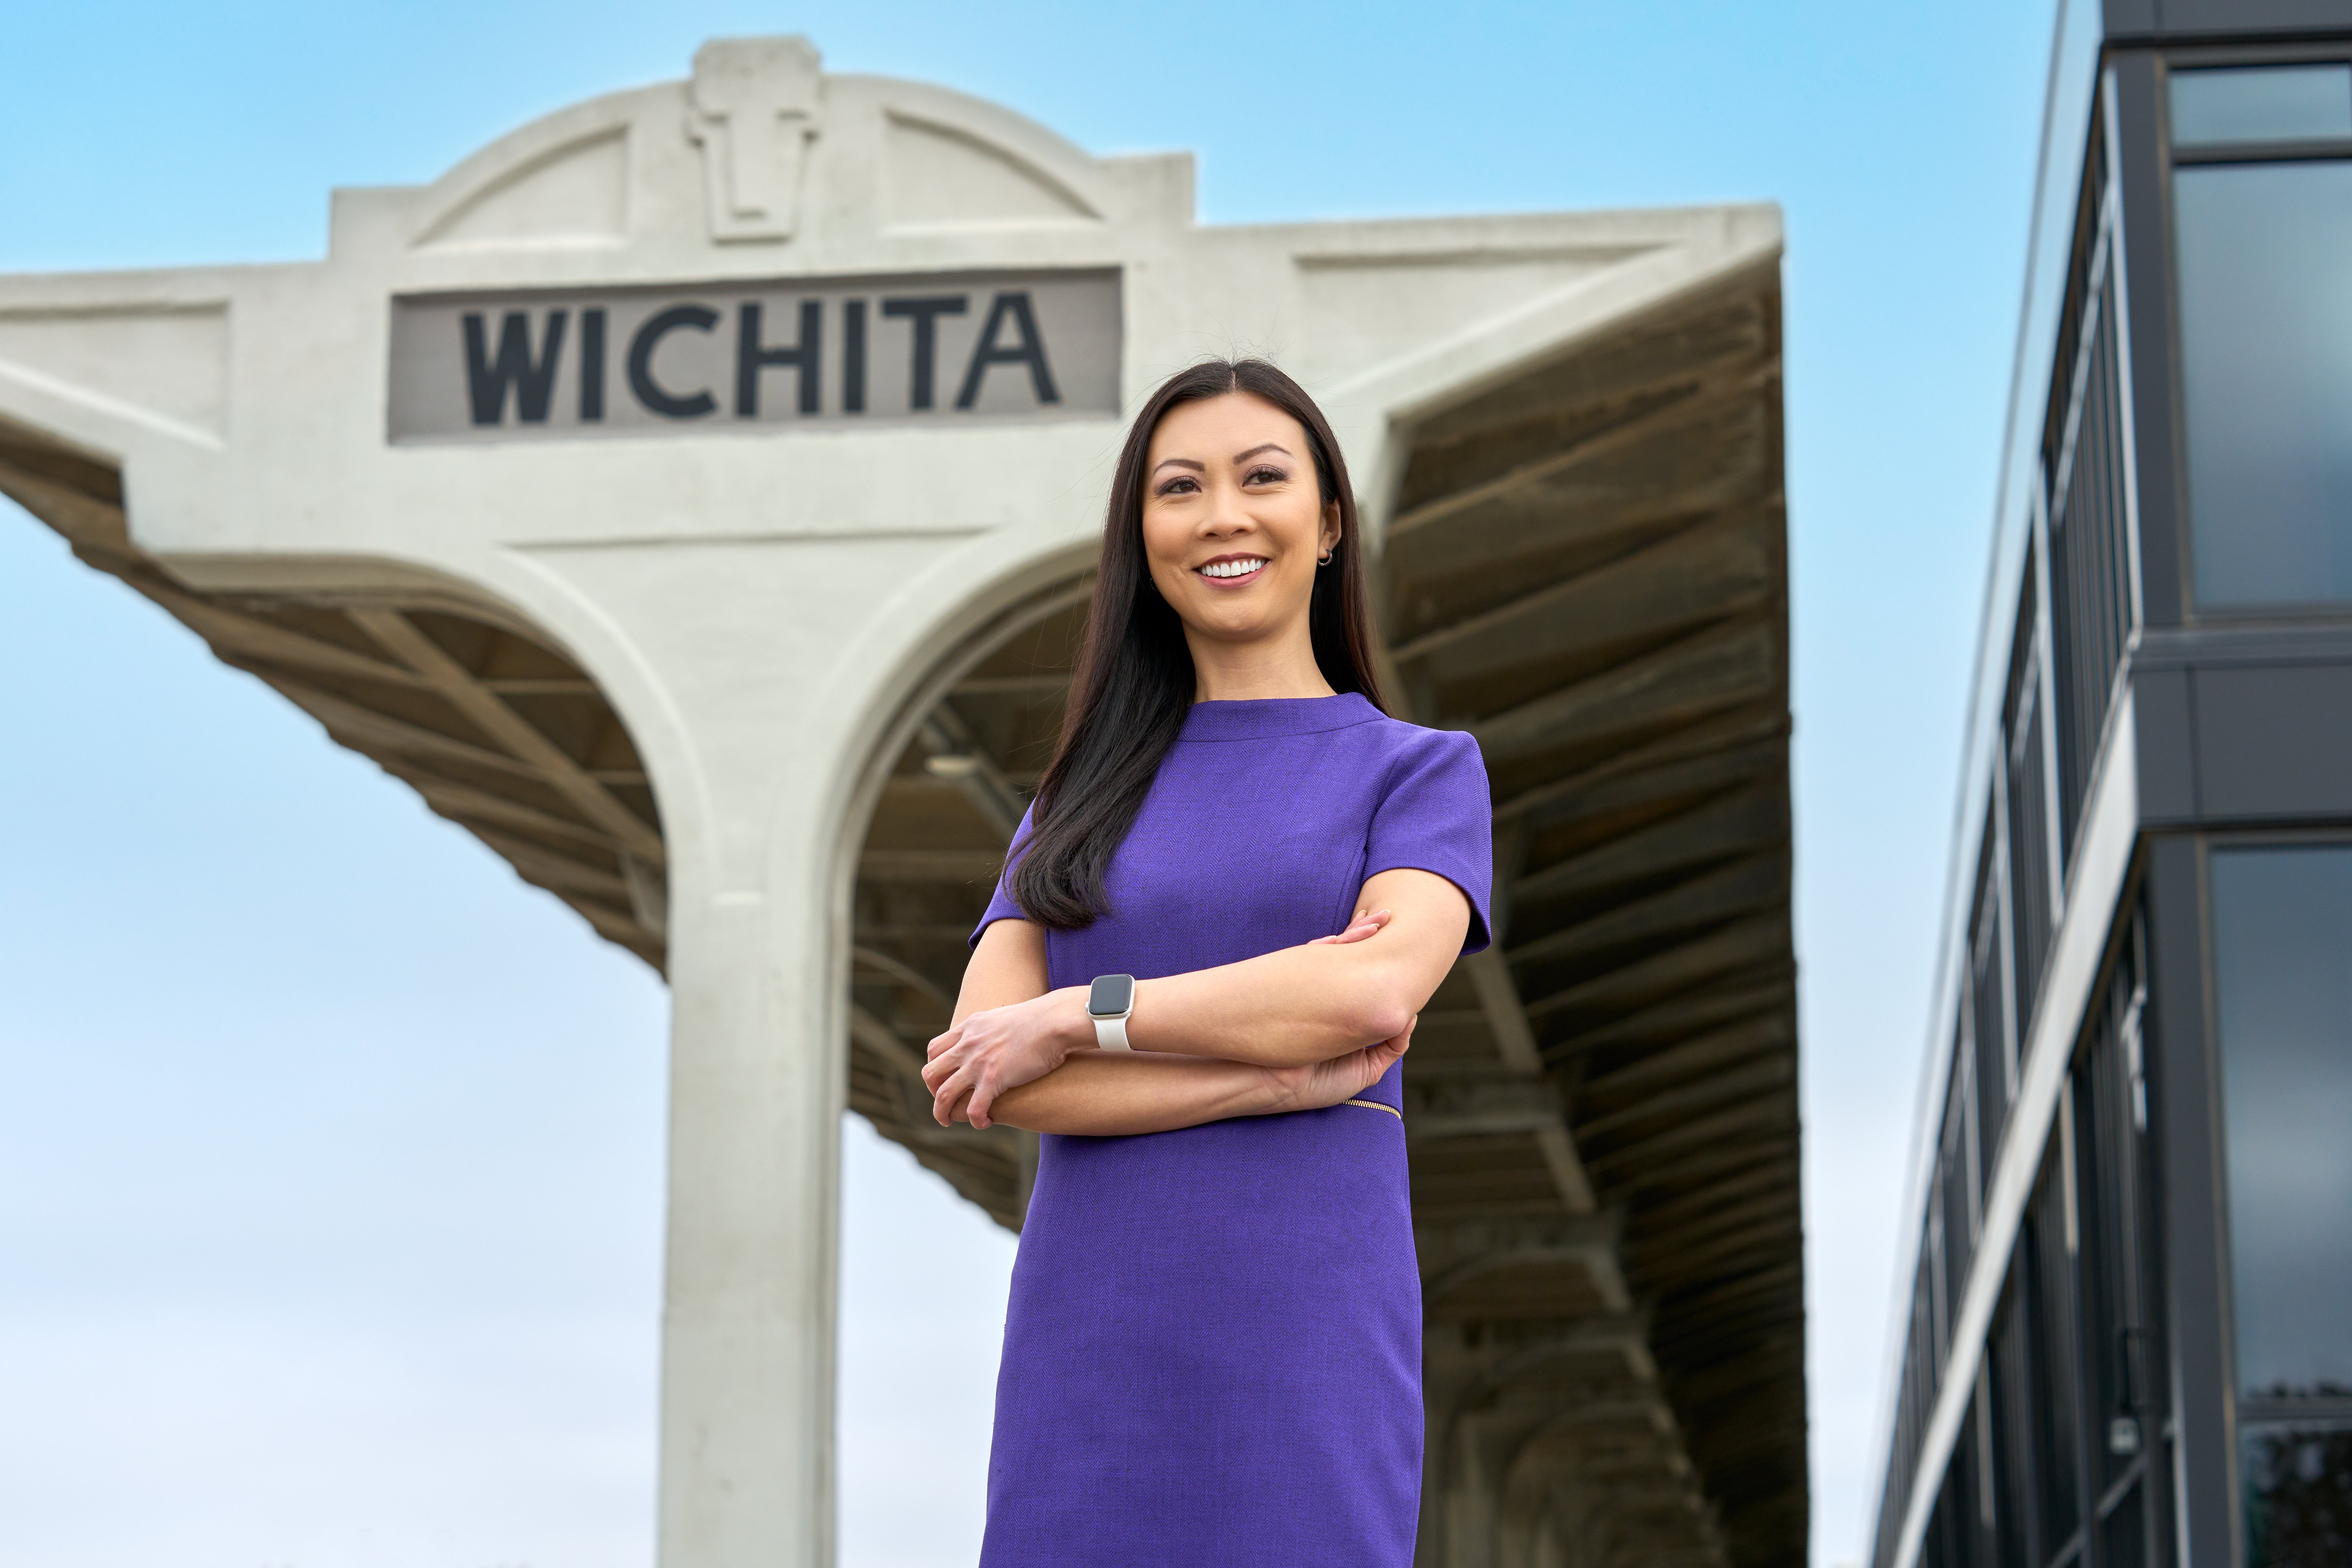 Lily Wu smiles as she poses in front of a sign for Wichita, Kansas.